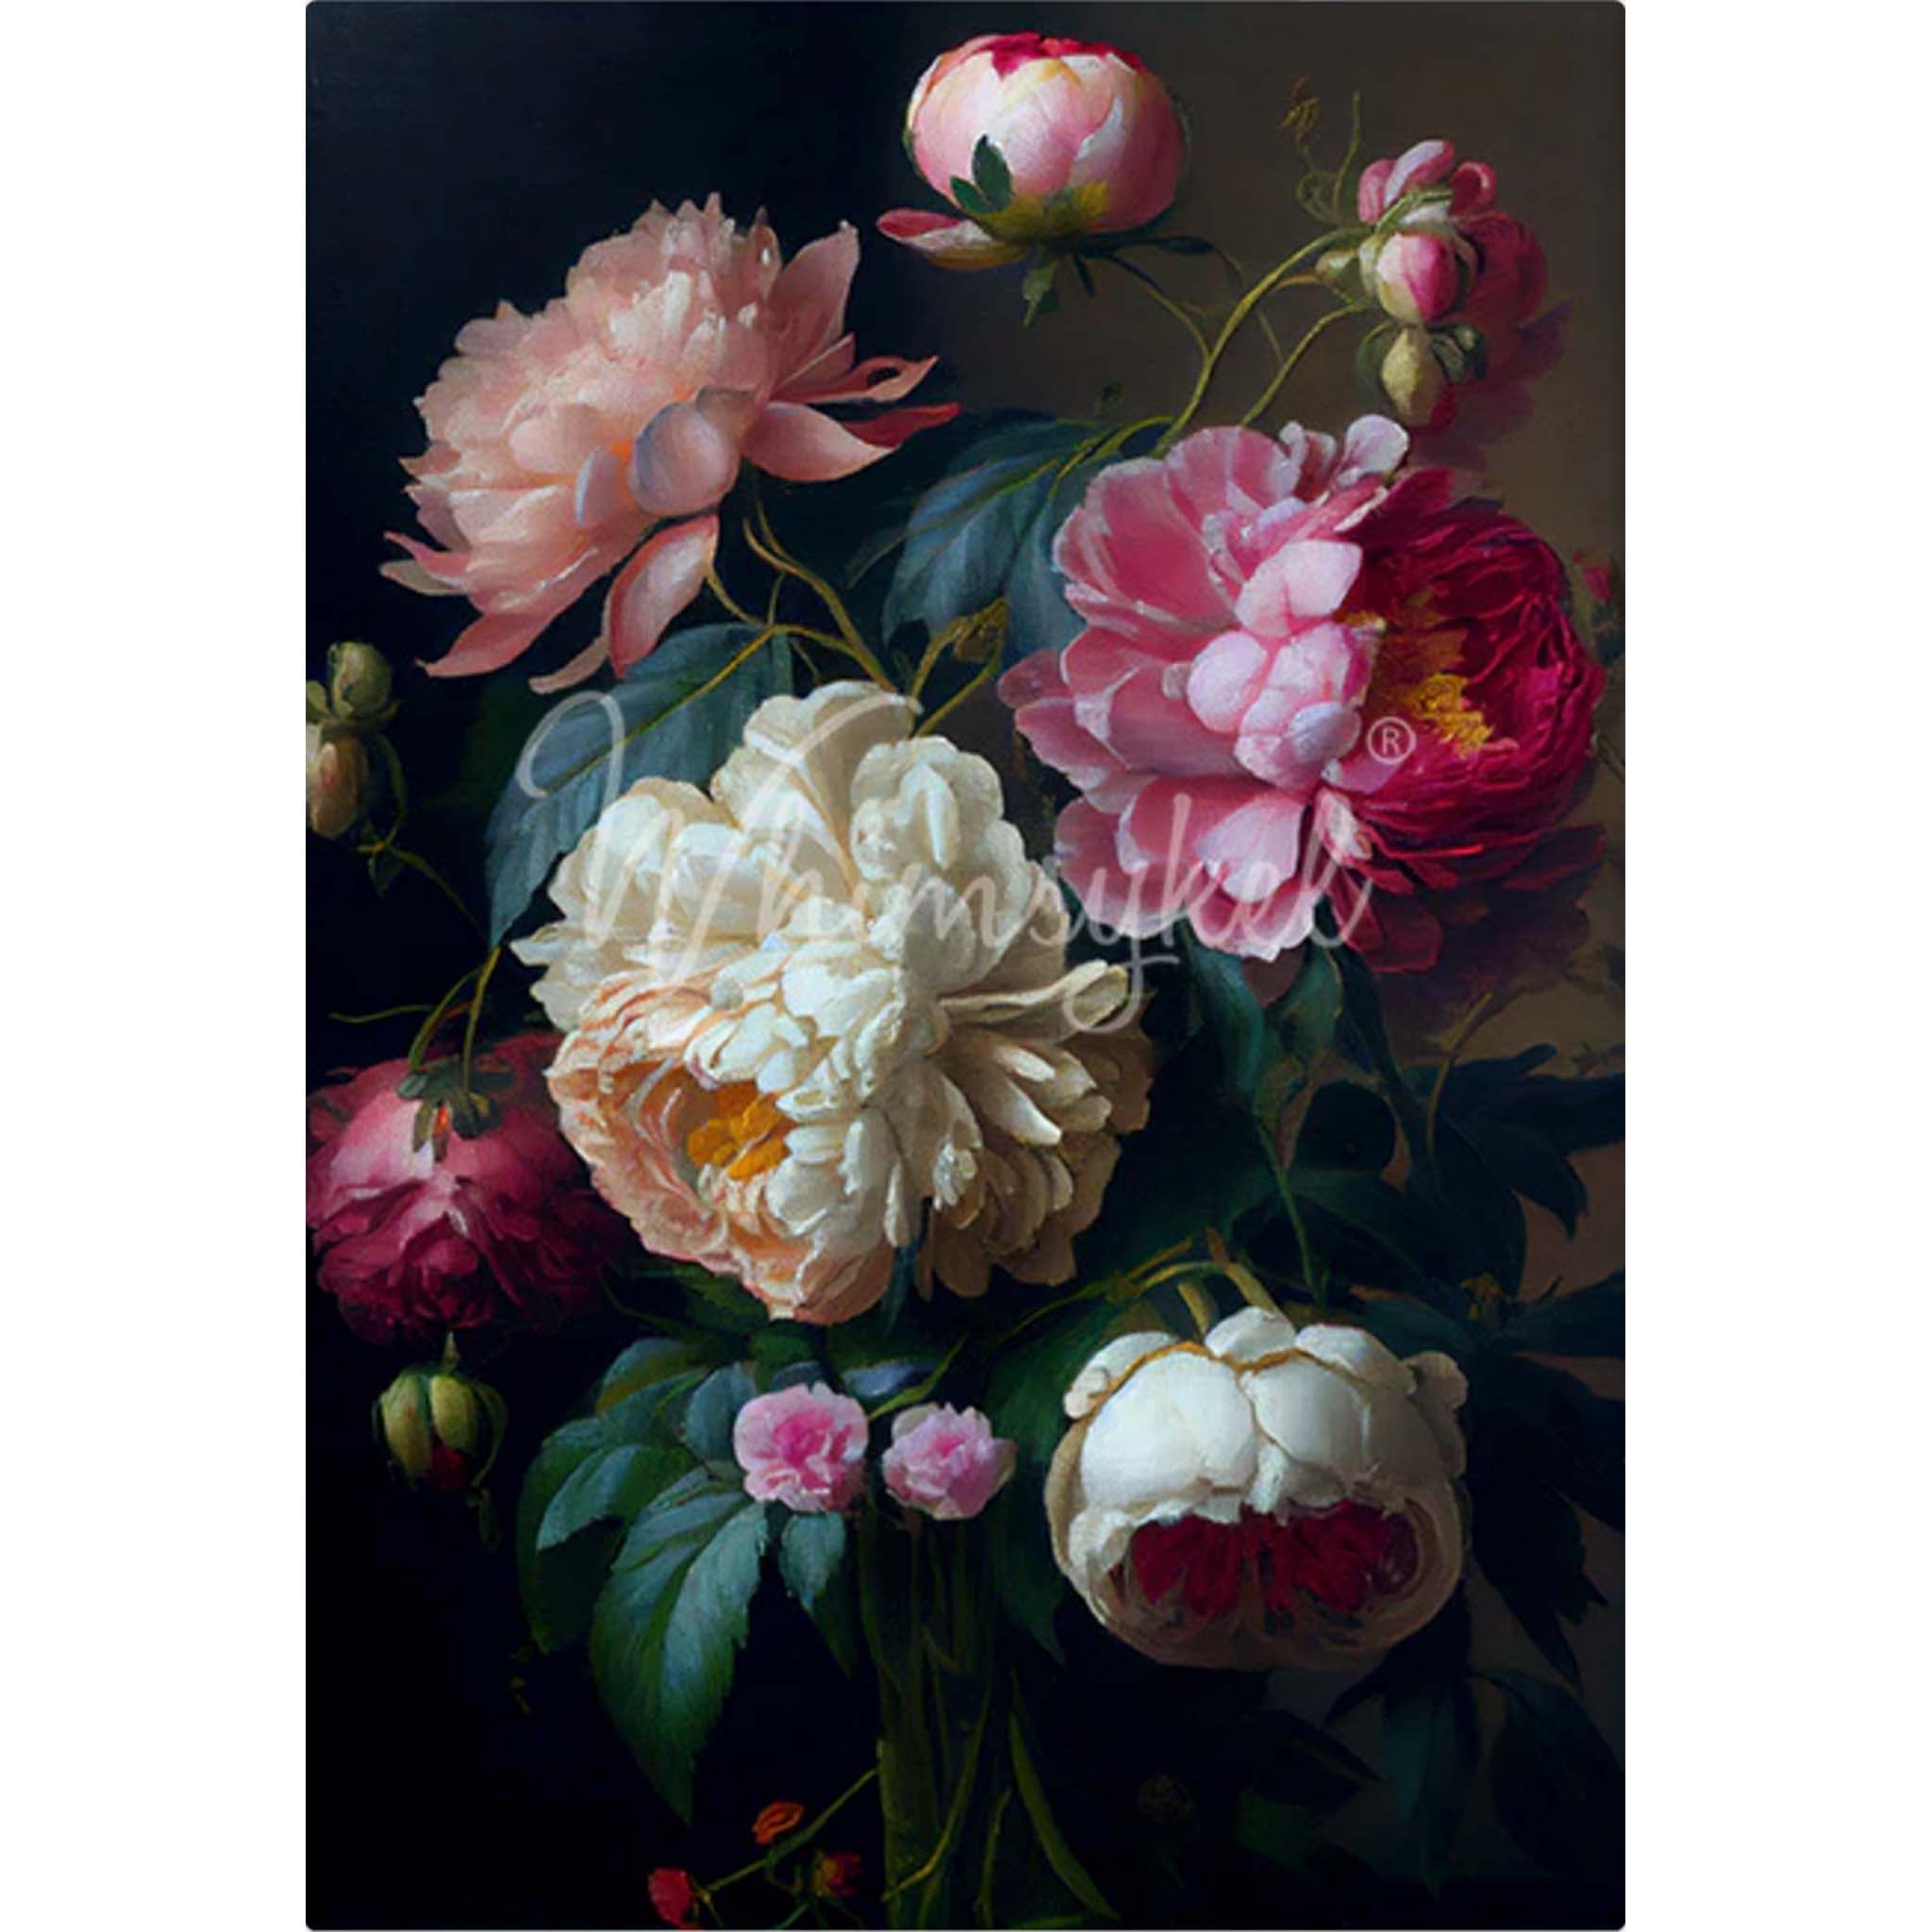 Tissue paper design that features a bouquet of large, colorful peonies and dainty pink roses against a dark moody background. White borders are on the sides.